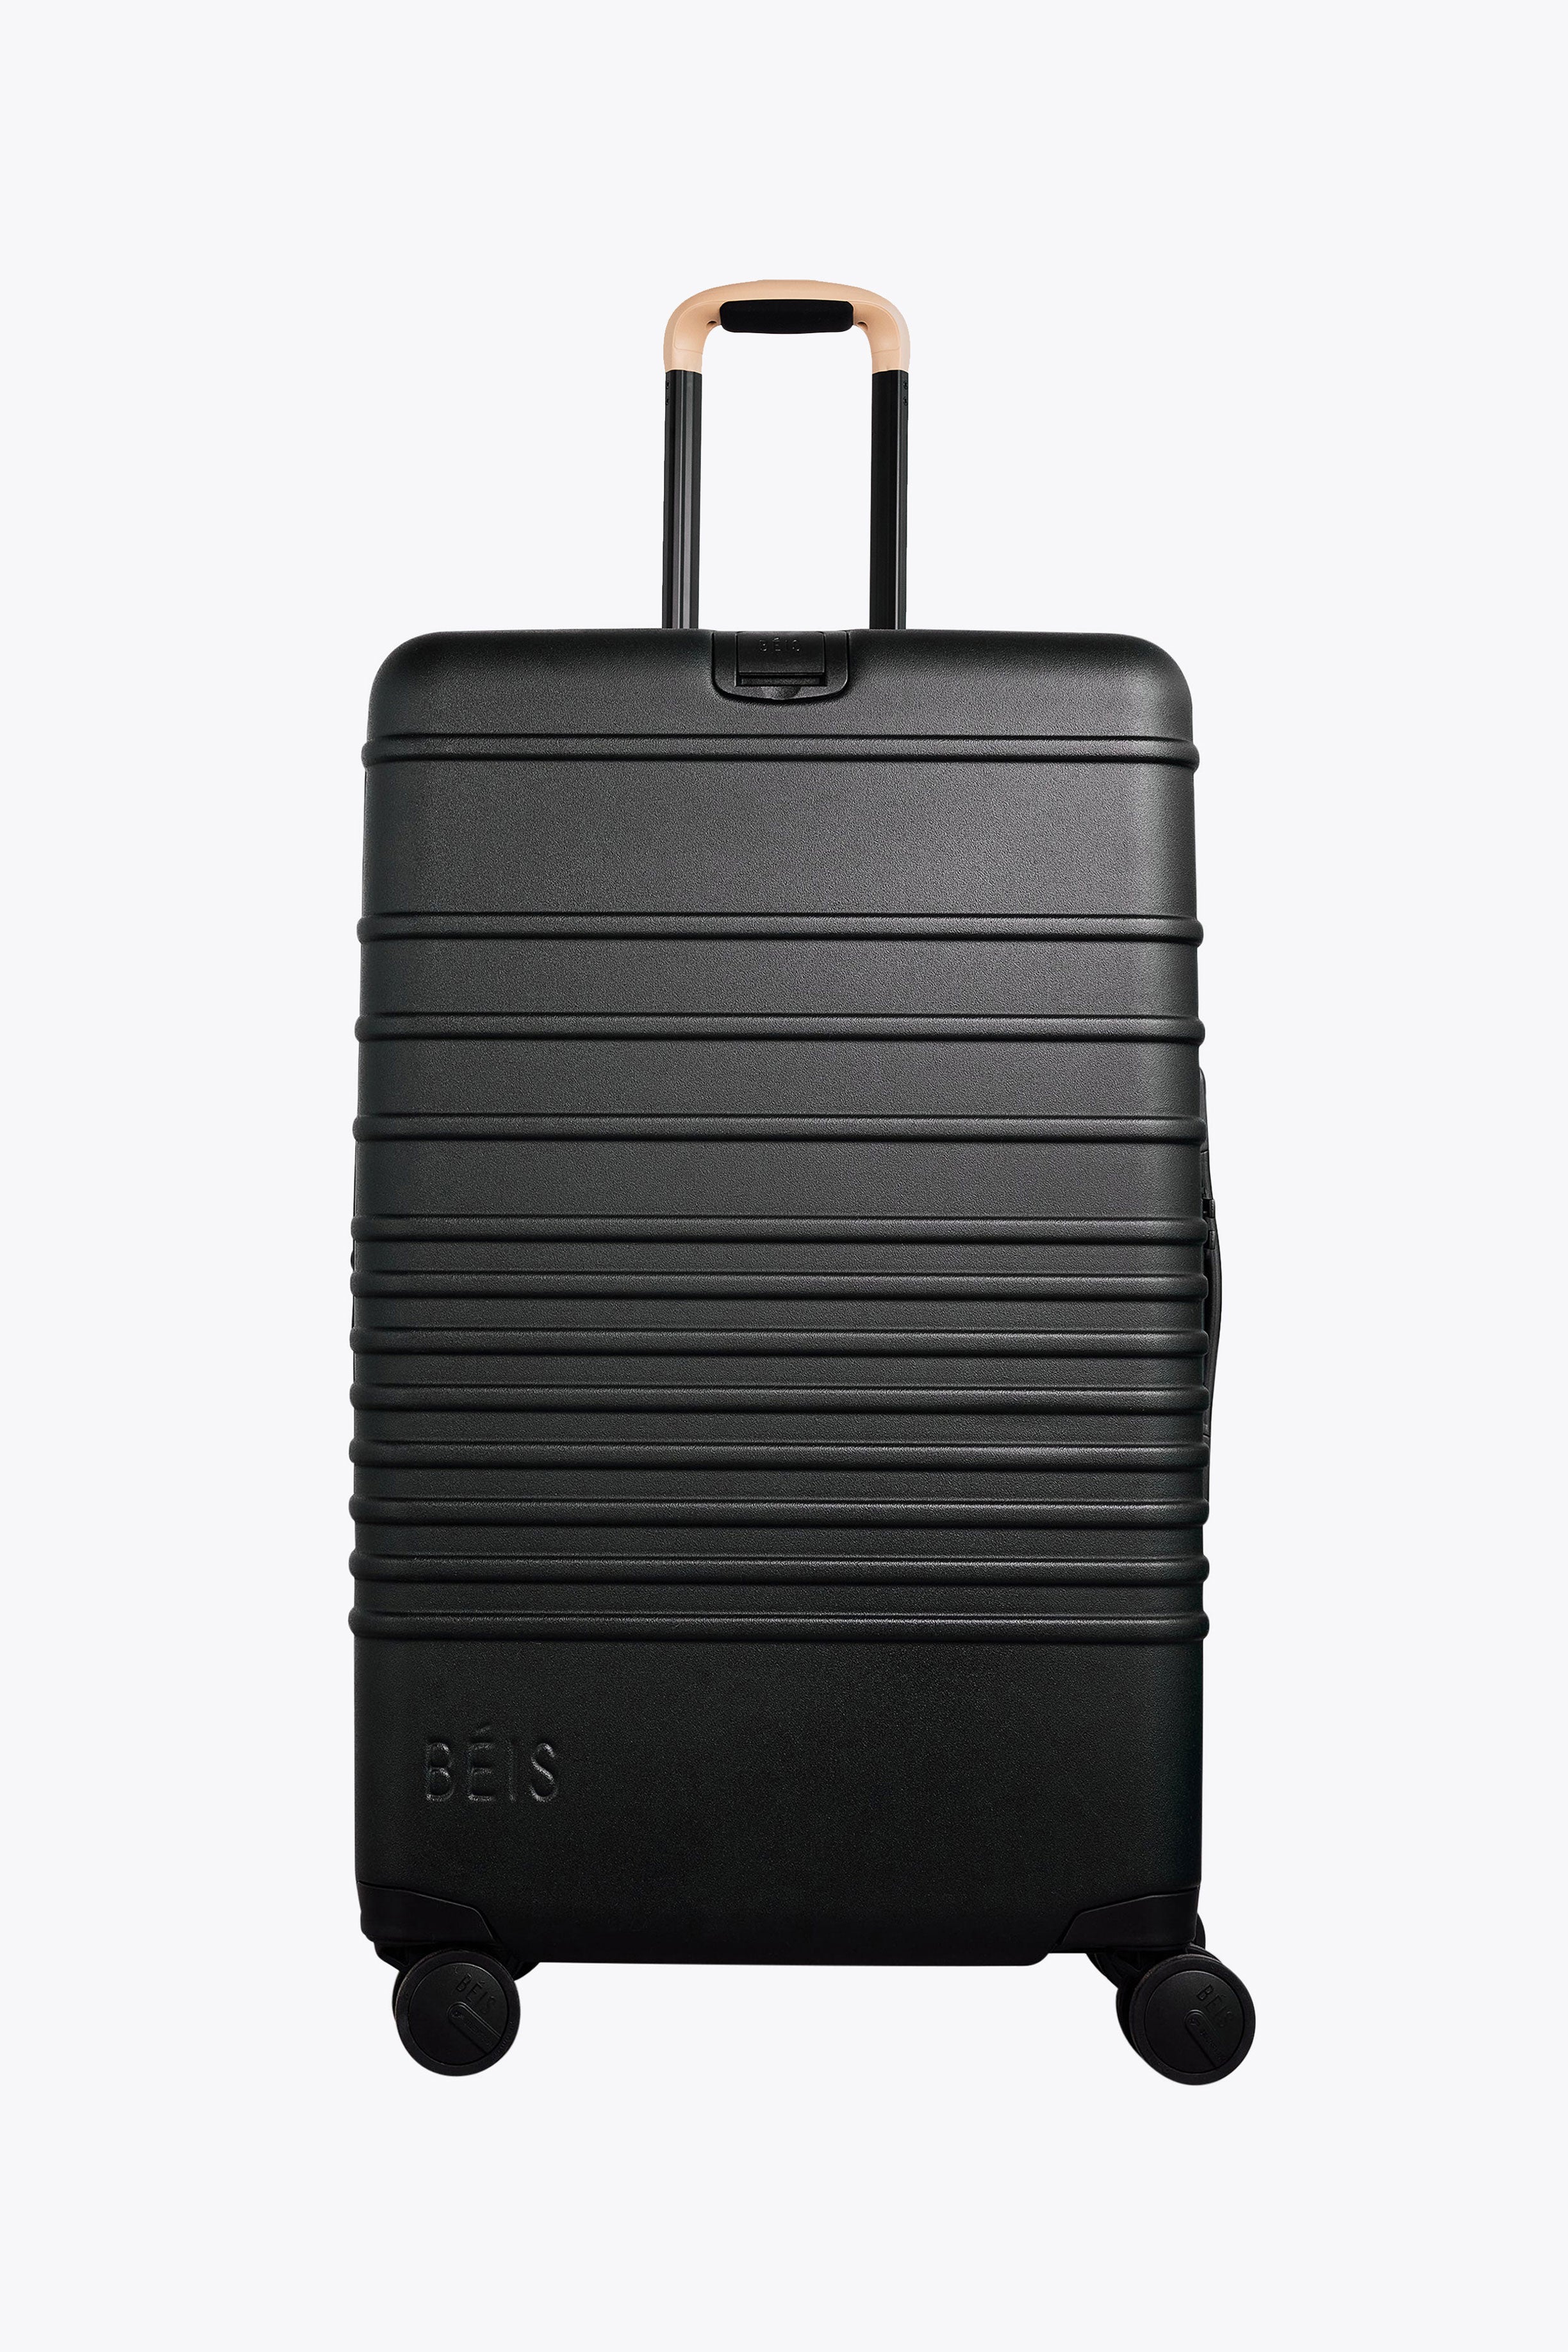 BÉIS 'The Large Check-In Roller' in Black - 29 In Roller Luggage & Suitcase